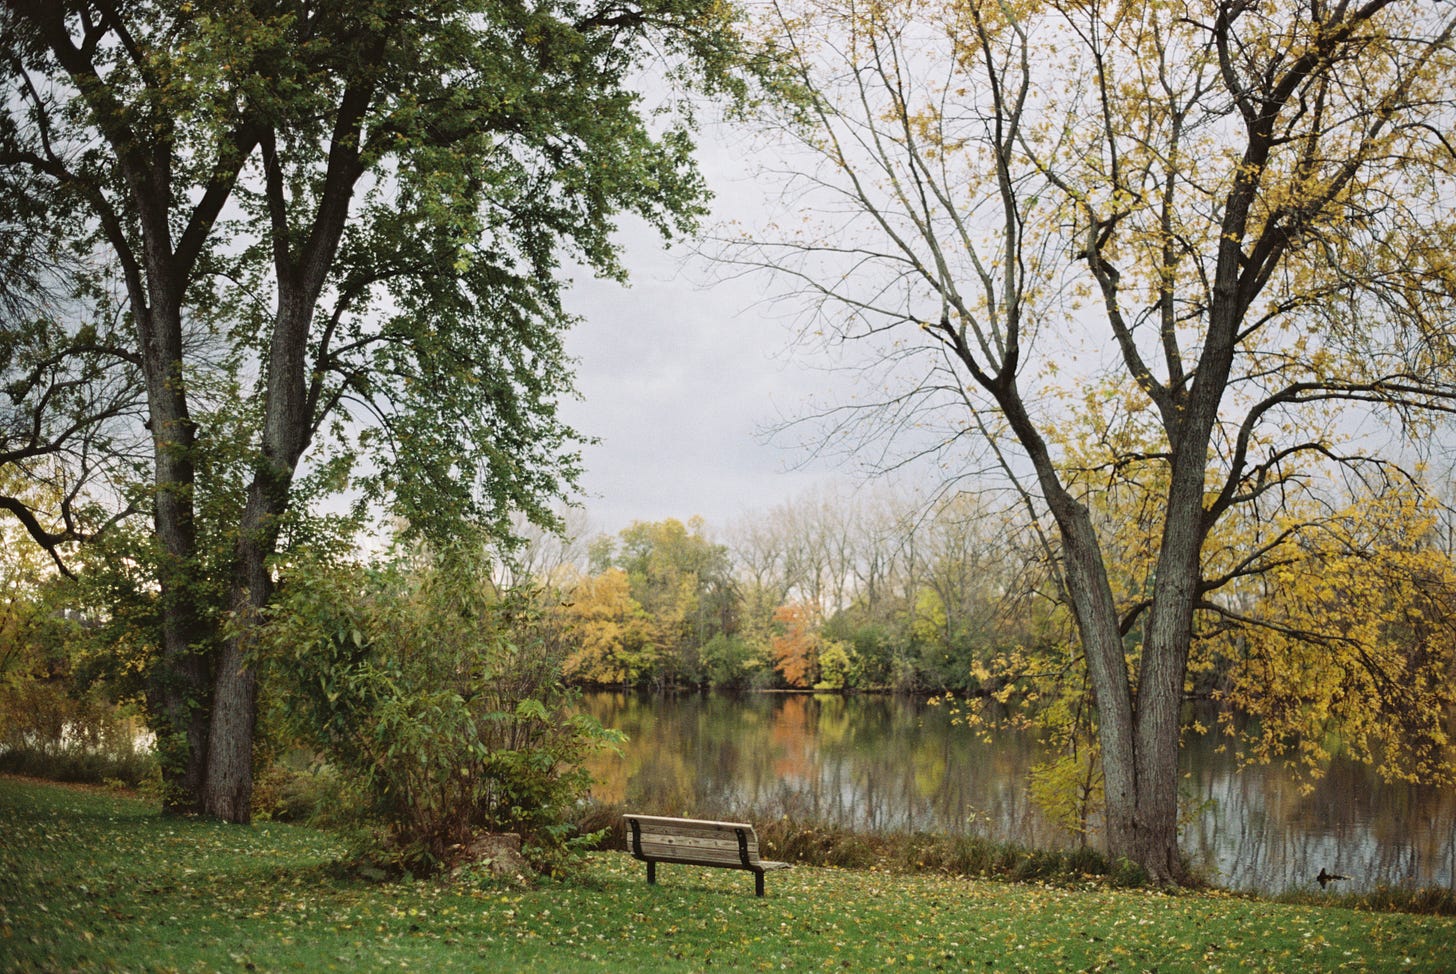 Photograph of an empty bench facing a river. It is framed by a tree on either side, and across the river there are dozens more, bare or in fall colors. The orange and yellow leaves reflect on the face of the water.